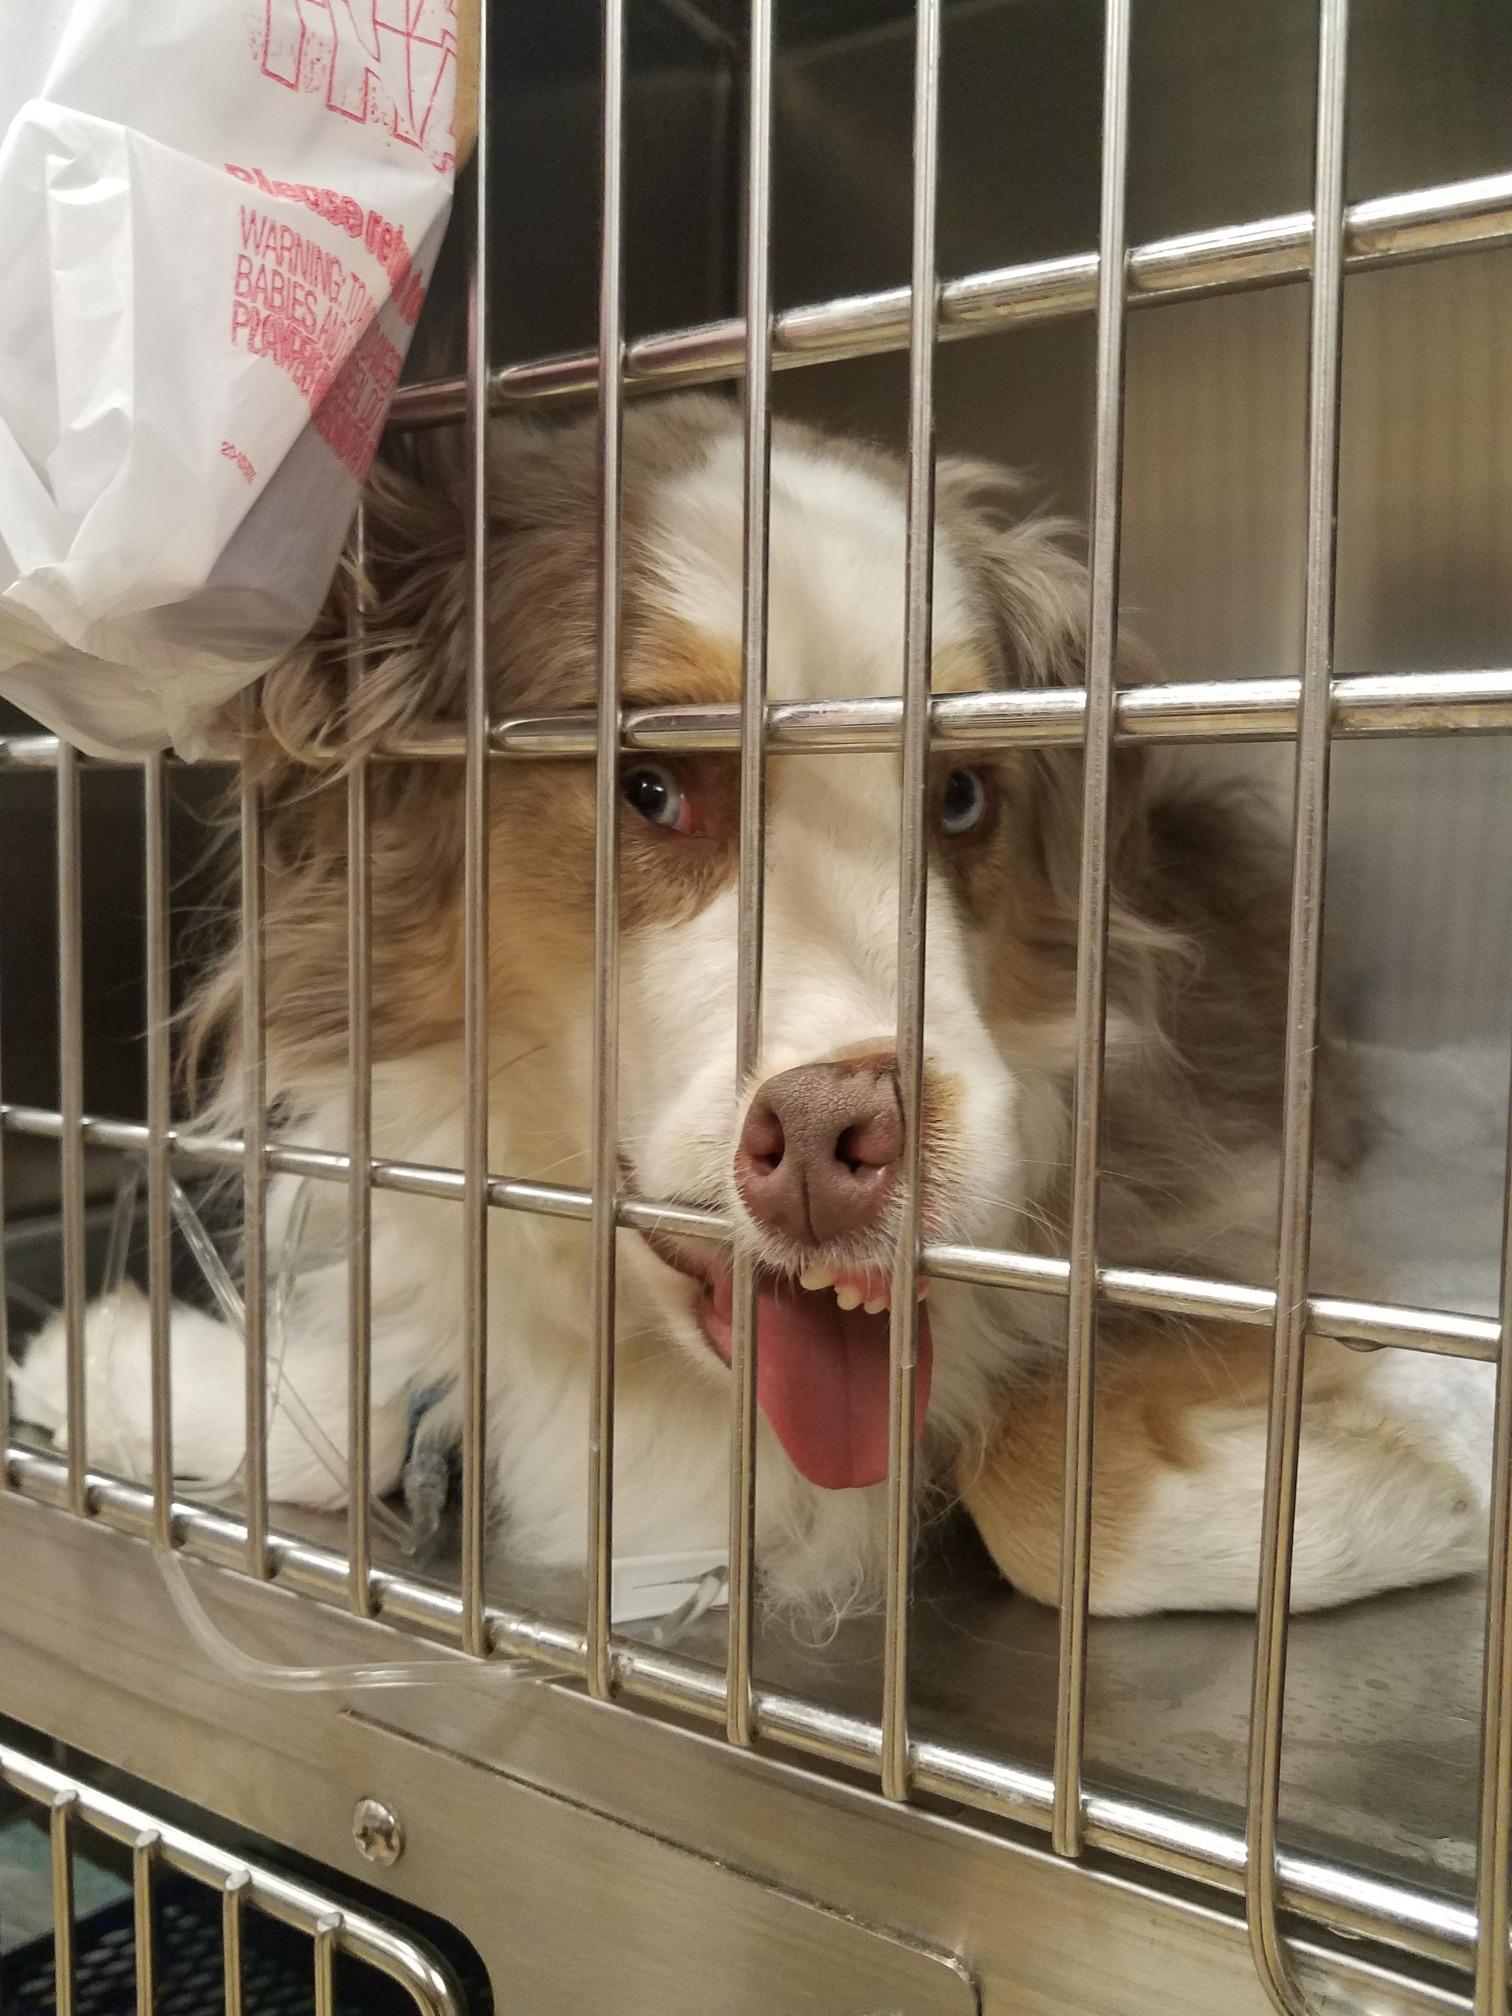 sedated dog pressing face against the cage in comical way